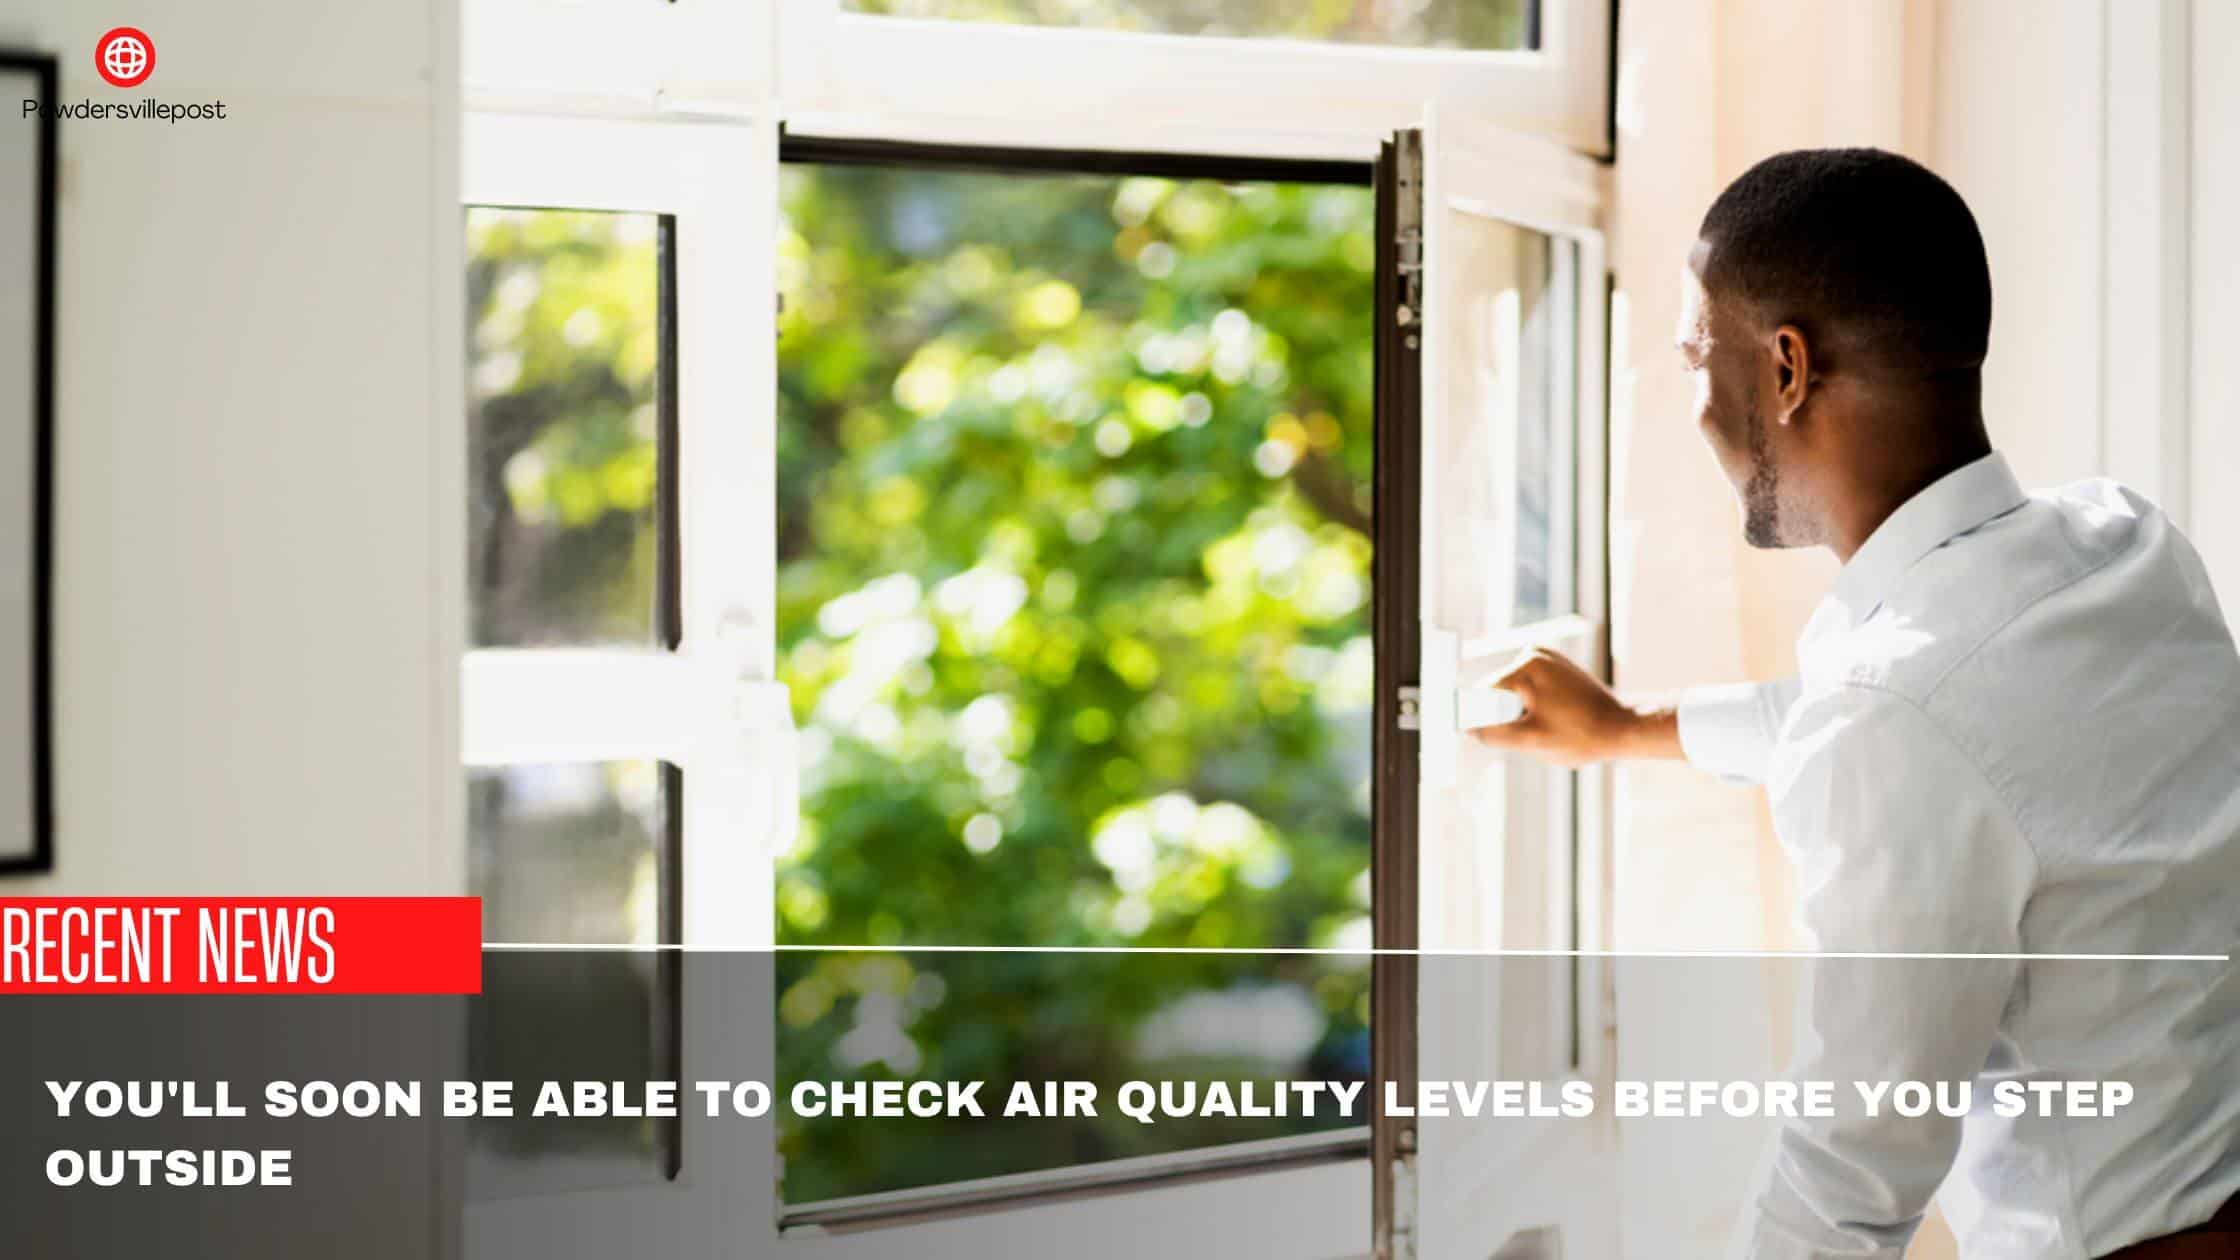 You'll Soon Be Able To Check Air Quality Levels Before You Step Outside